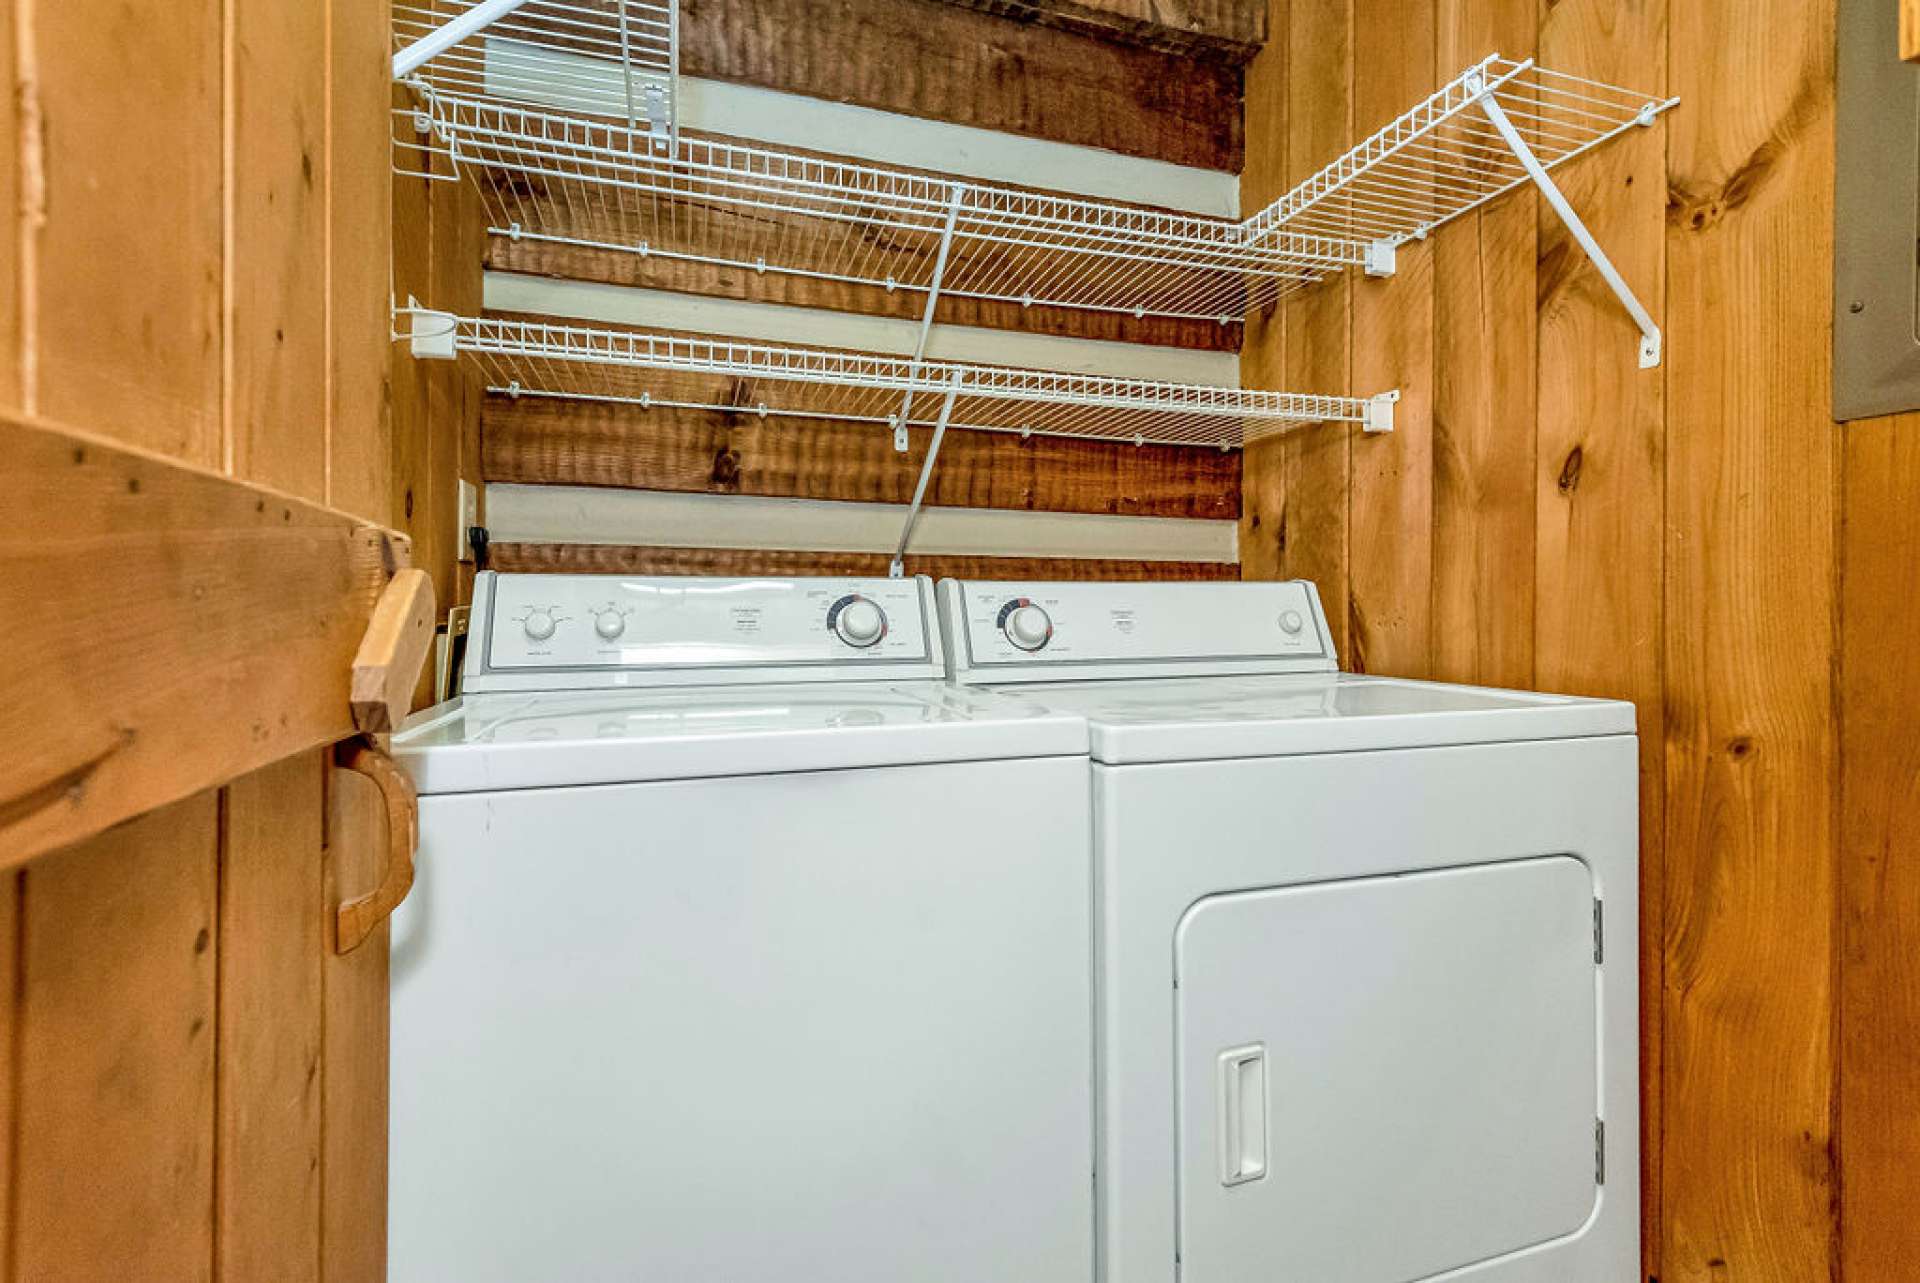 There's space for a full-size washer & dryer plus storage shelving with racks to hang your clothes straight out of the dryer.